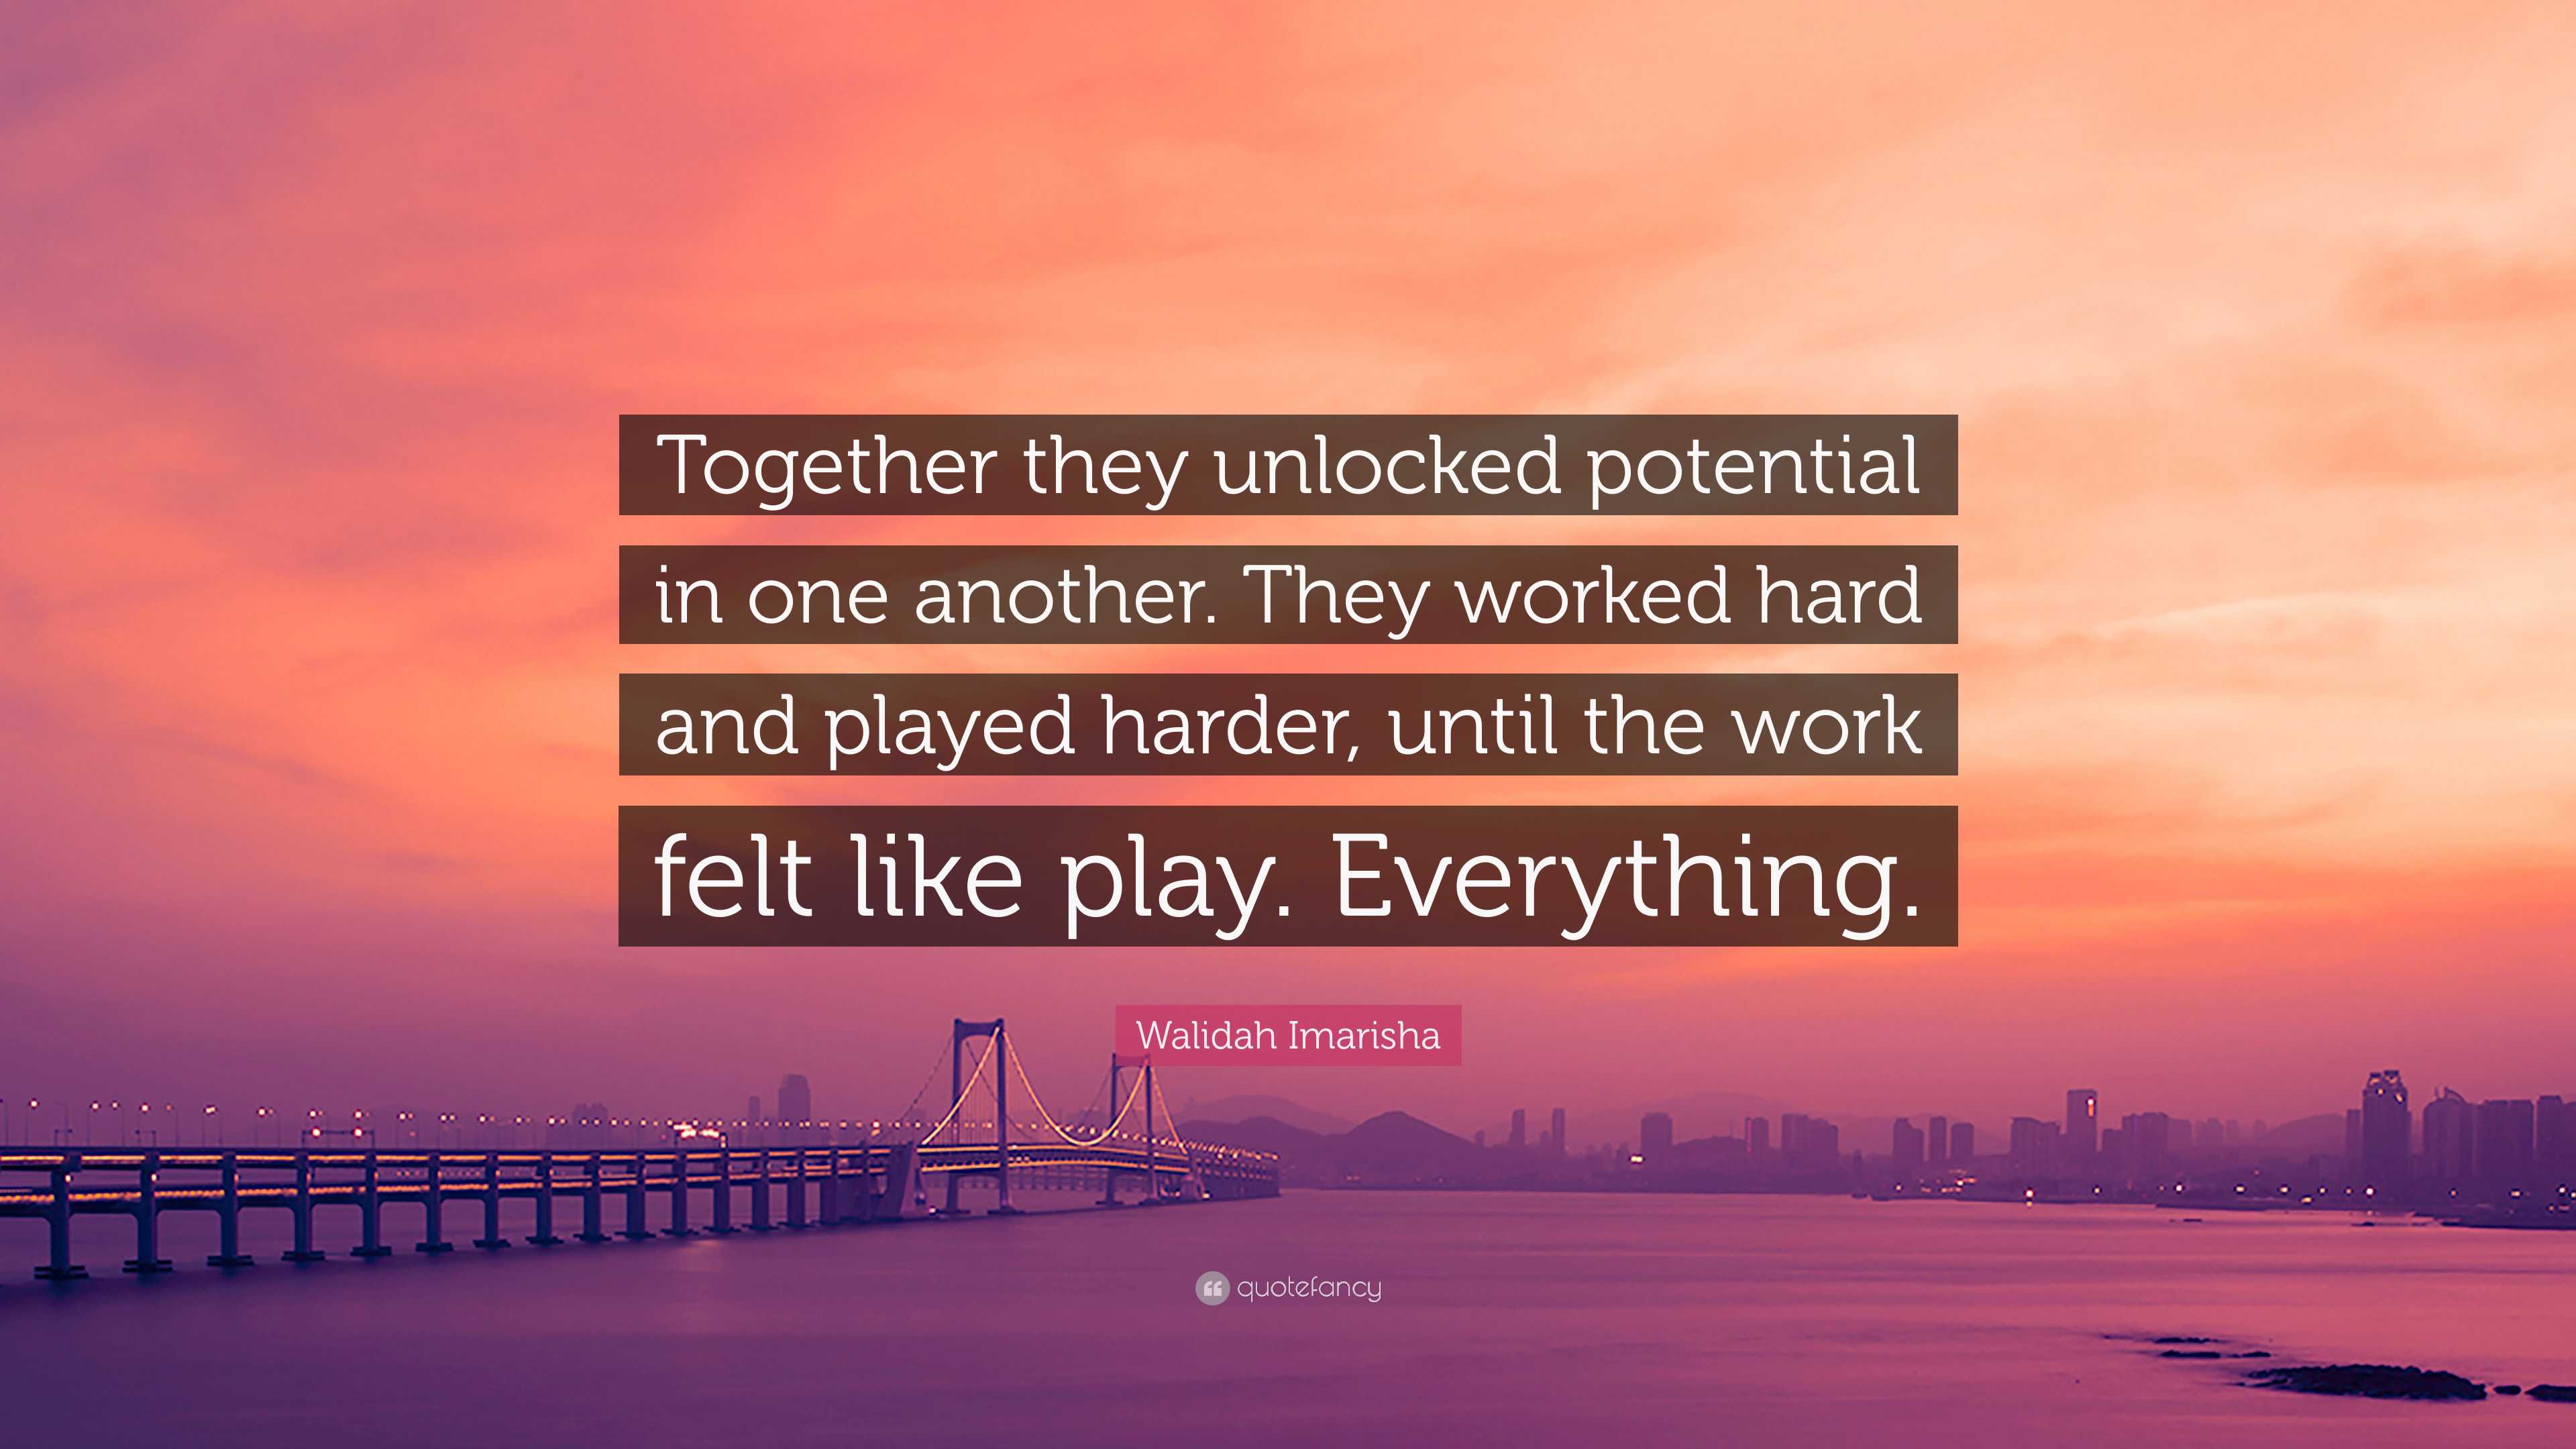 Walidah Imarisha Quote: “Together they unlocked potential in one another.  They worked hard and played harder, until the work felt like play. Ever”